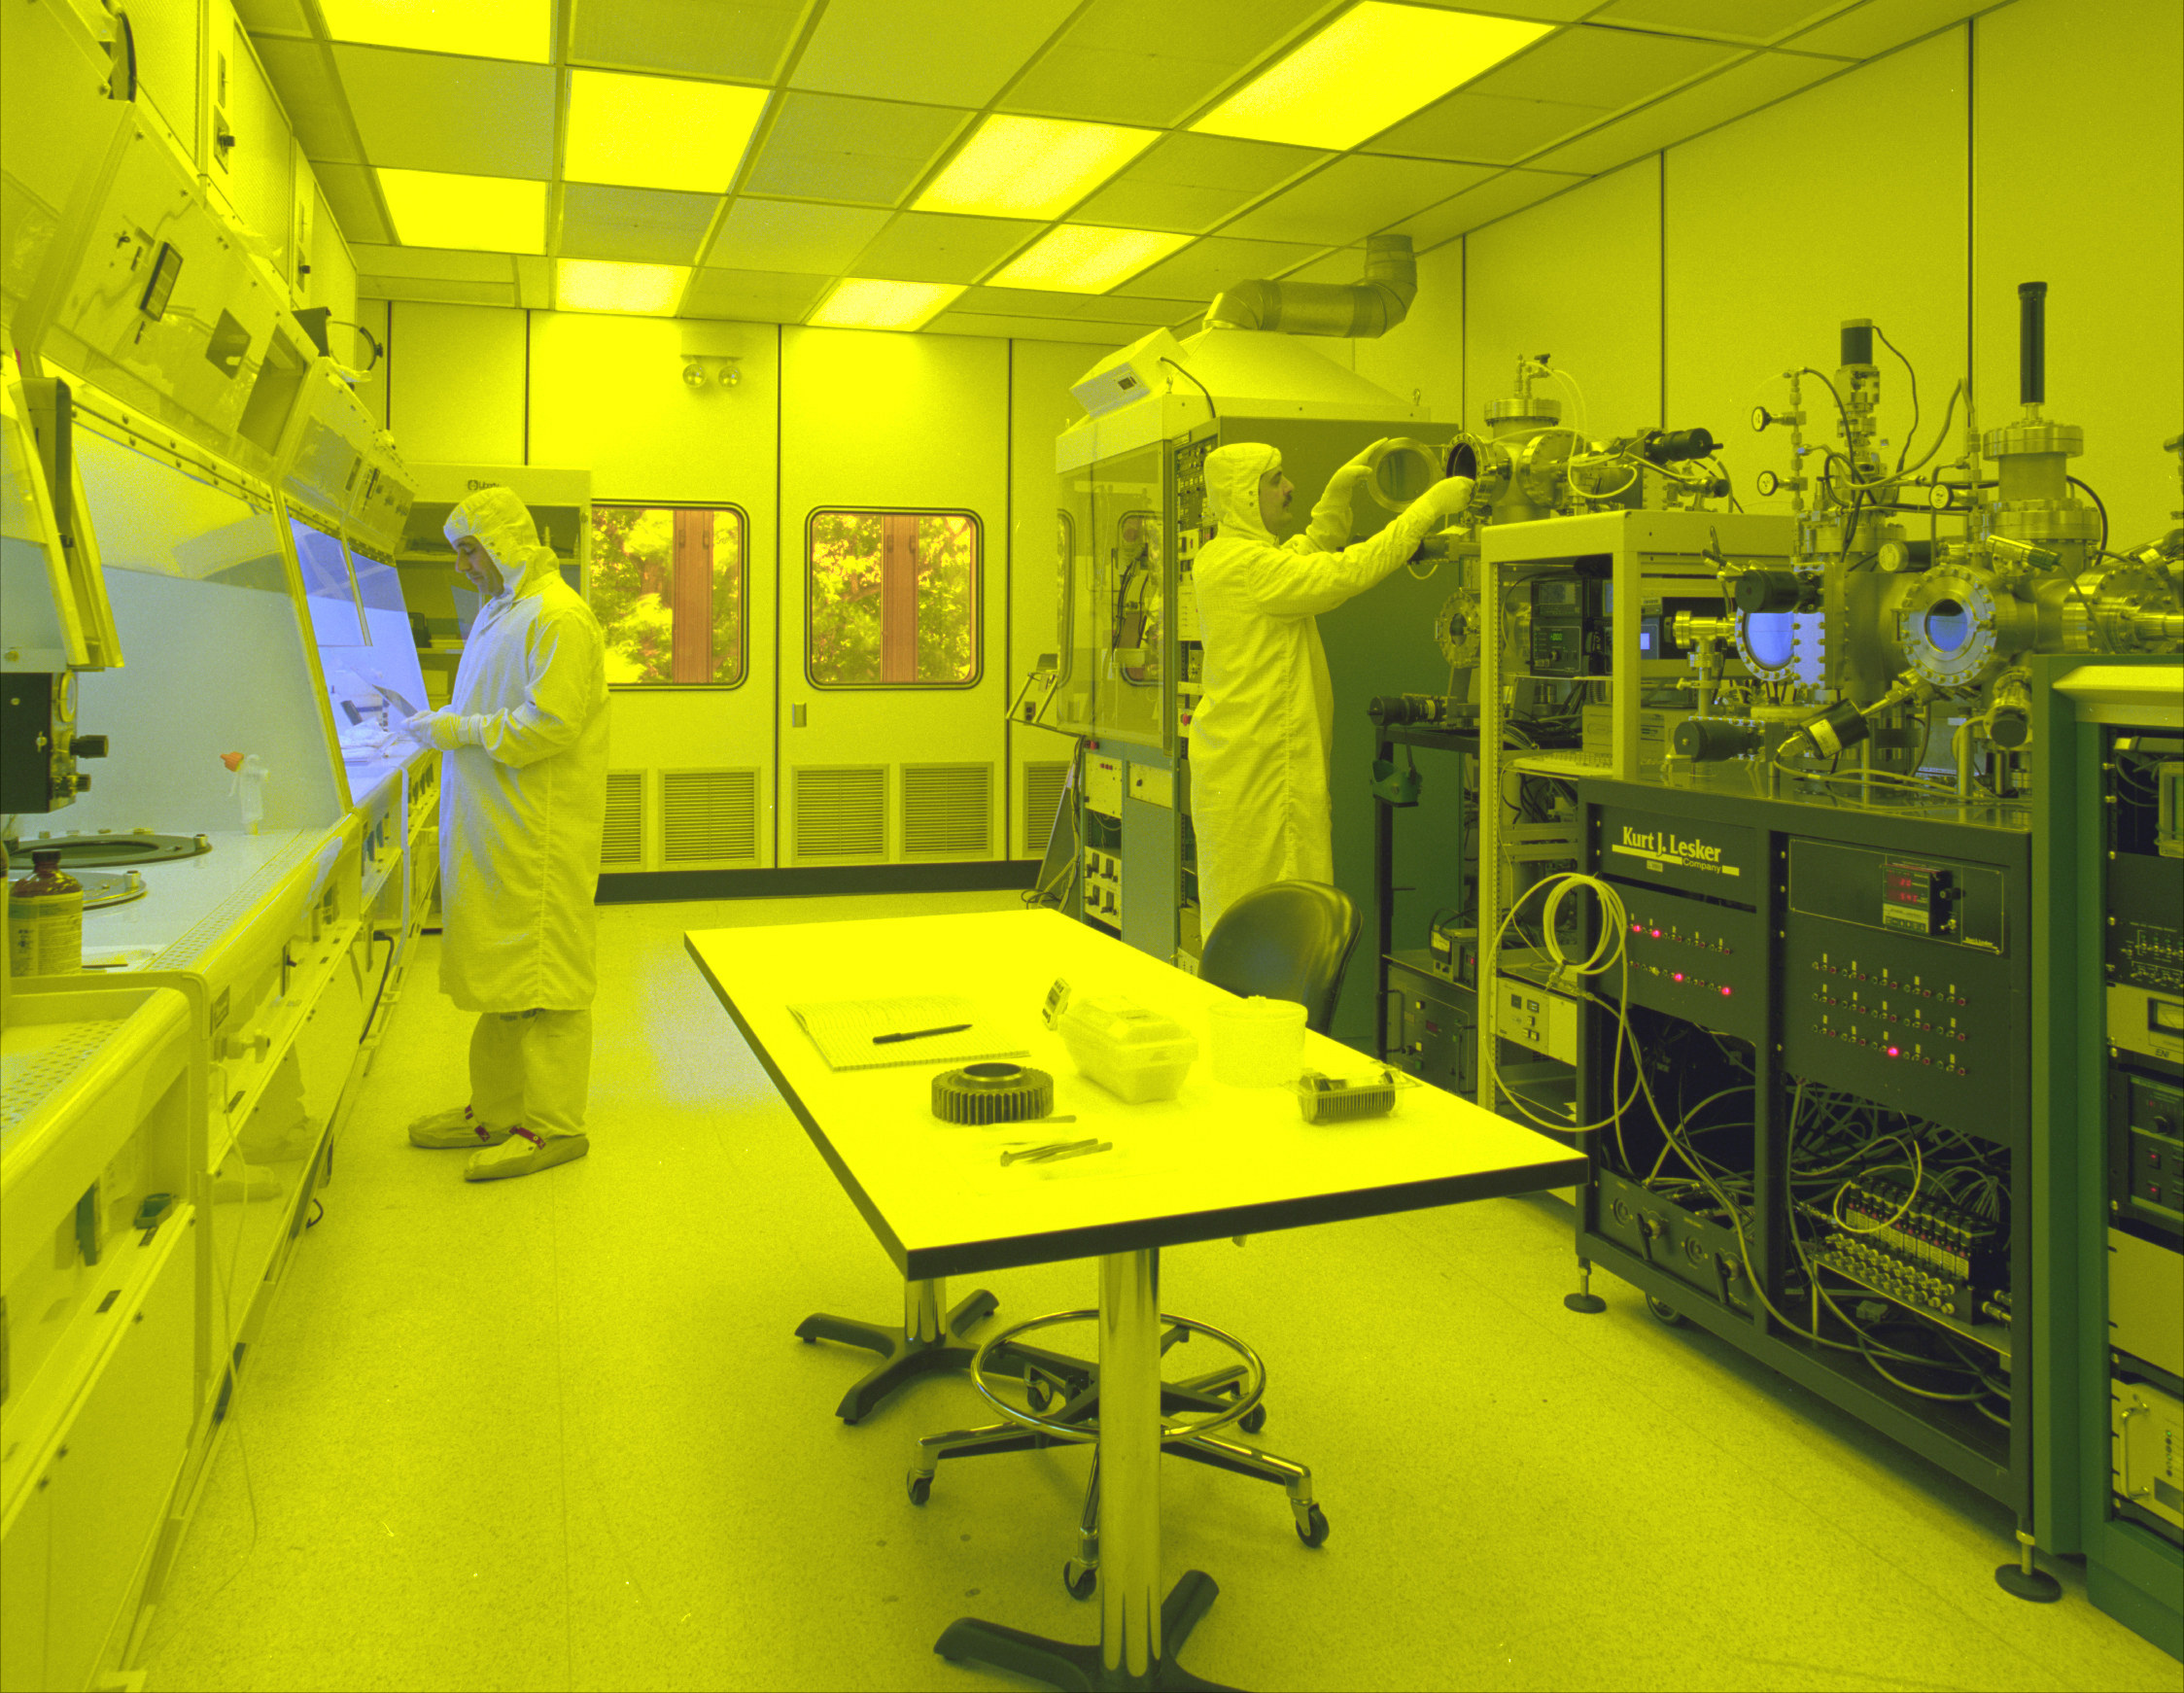 Yitch - Biocartis - A cleanroom as catalyst for Augmented Reality